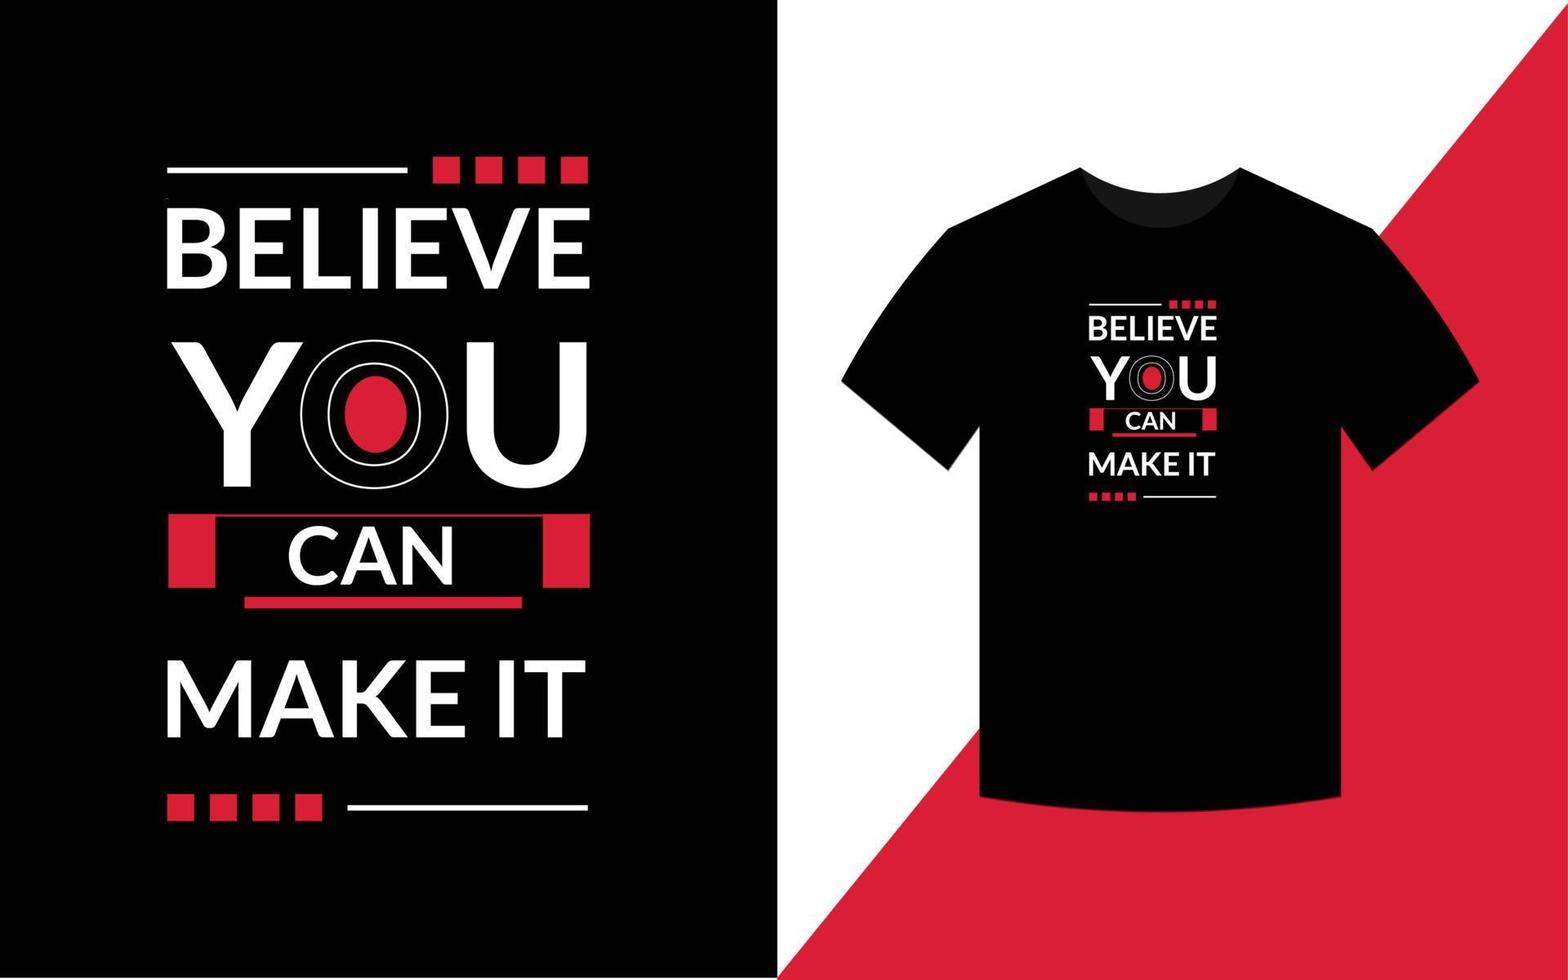 Believe you can make it Typography Inspirational Quotes t shirt design for fashion apparel printing. vector